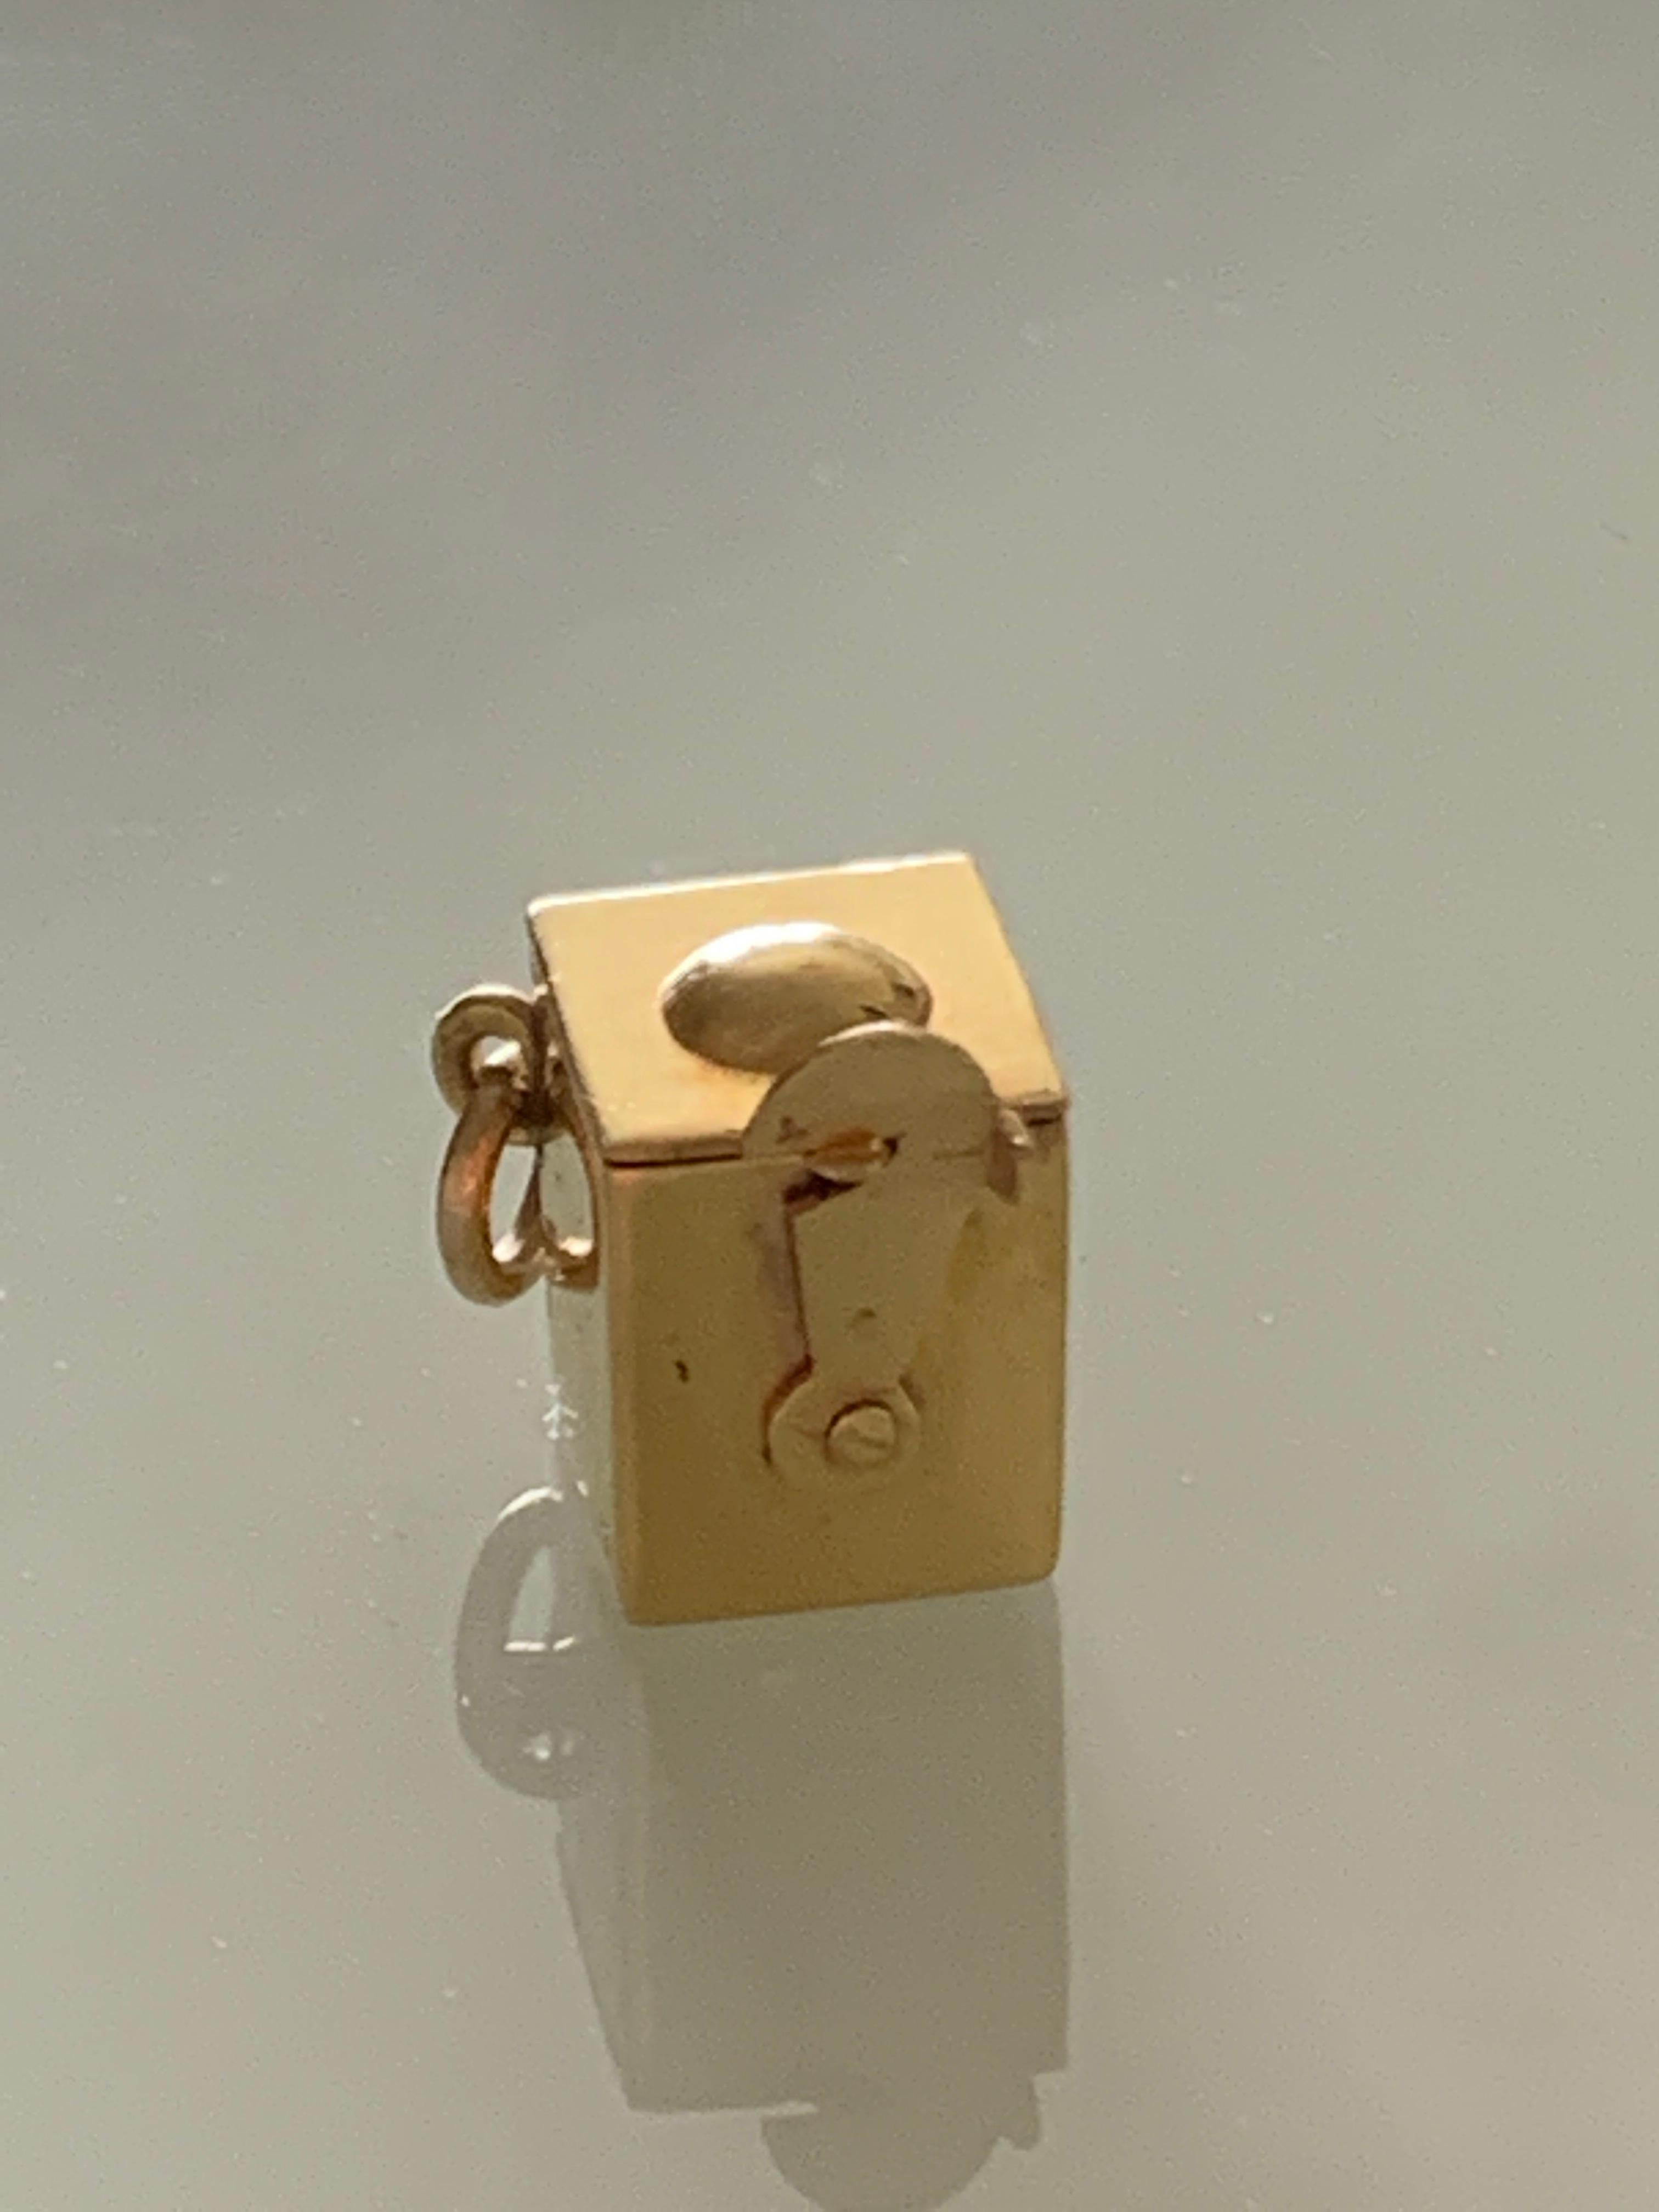 Rare Jack in a box charm
9ct Gold Box stamped 9ct beneath
Great large secure fastener
Jack has an enameled face and a navy blue collar
it seems he may have lost his hair 
Box is buttery bright gold .
